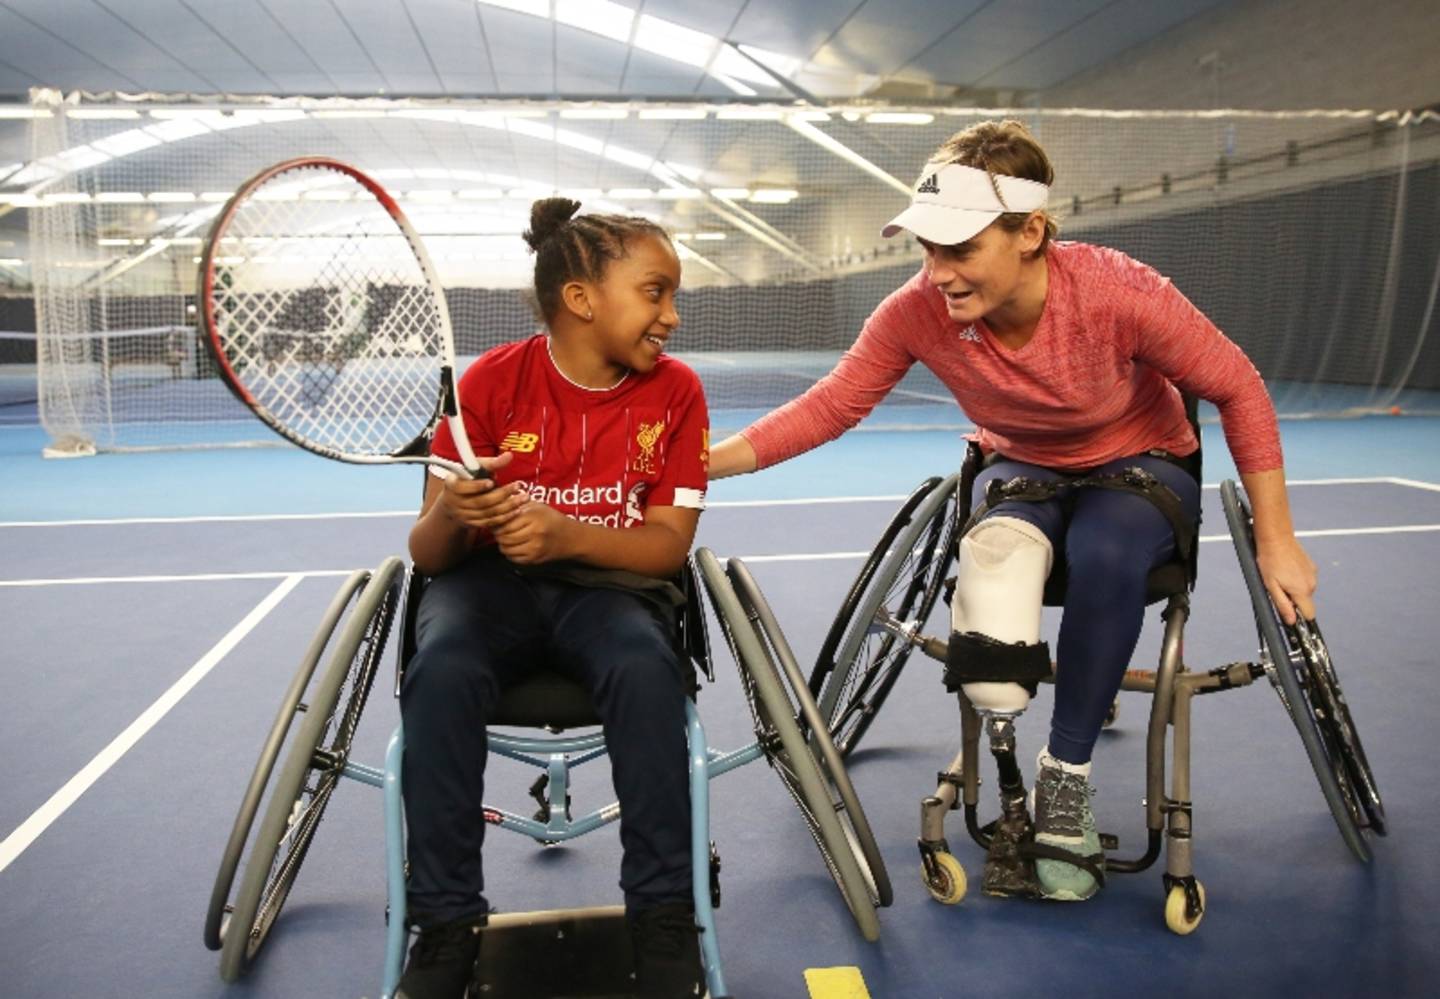 Young girl trying out wheelchair tennis with tennis coach